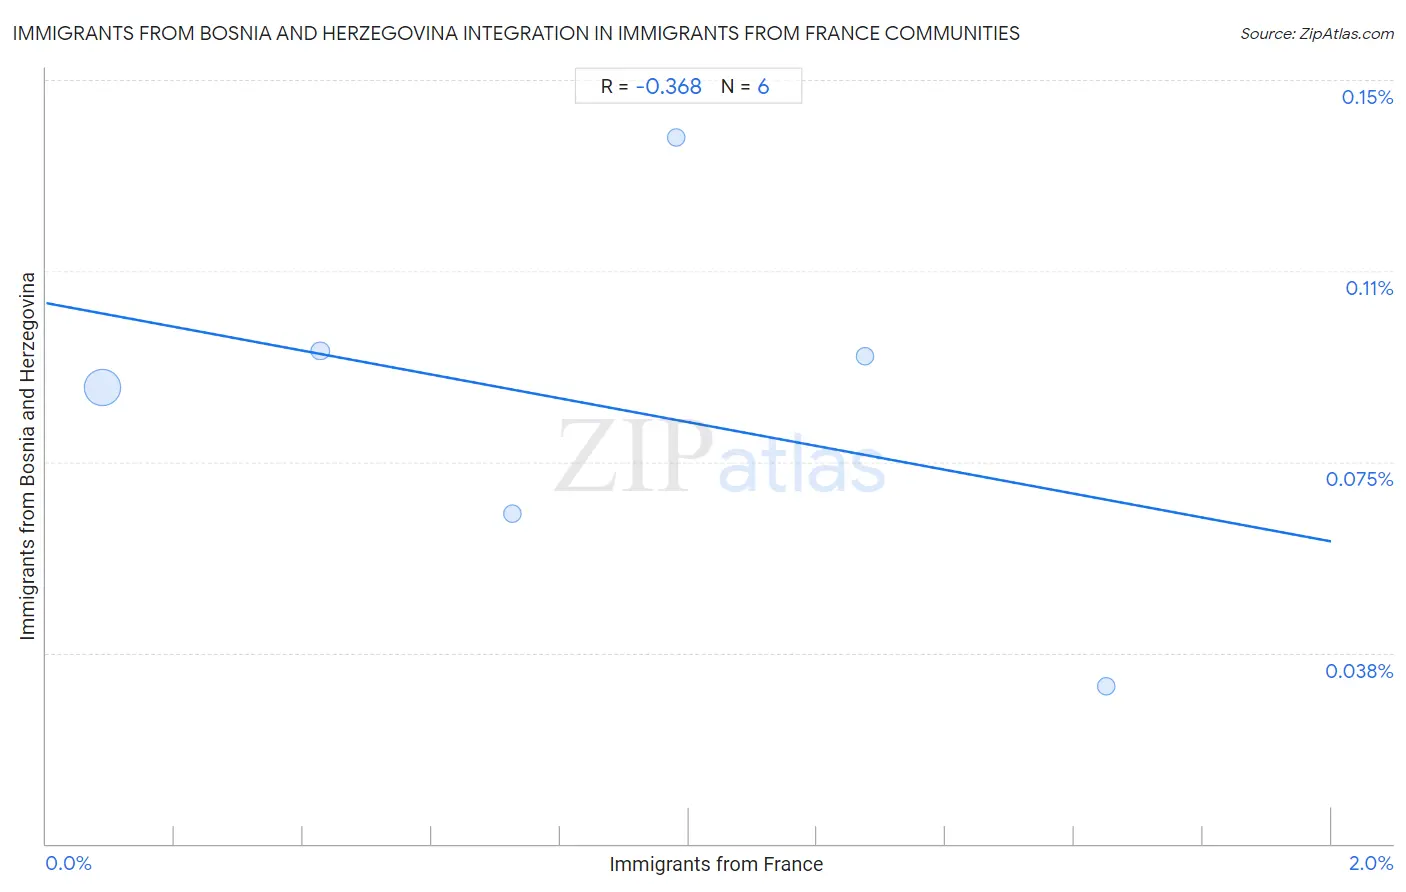 Immigrants from France Integration in Immigrants from Bosnia and Herzegovina Communities